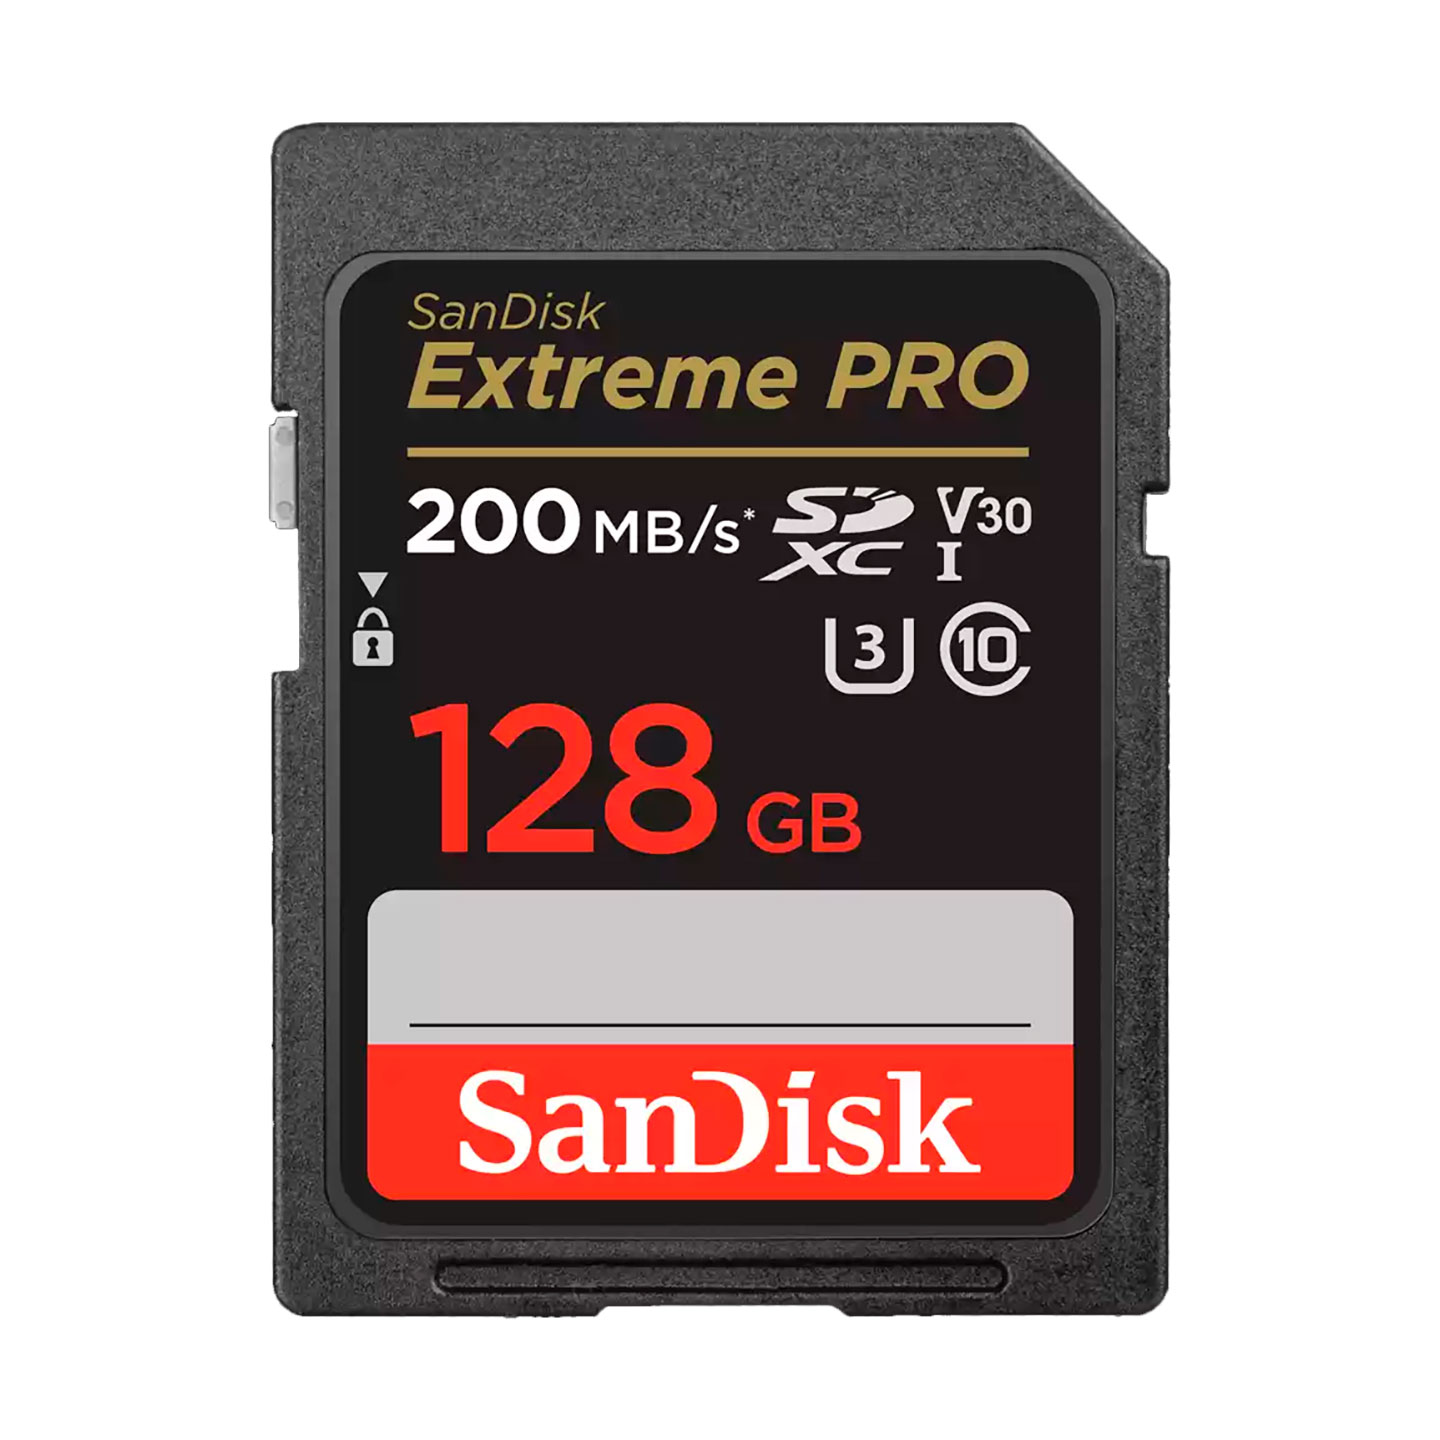 sandisk_extreme_pro_sdxc_uhs_i_gn4in_128gb_01